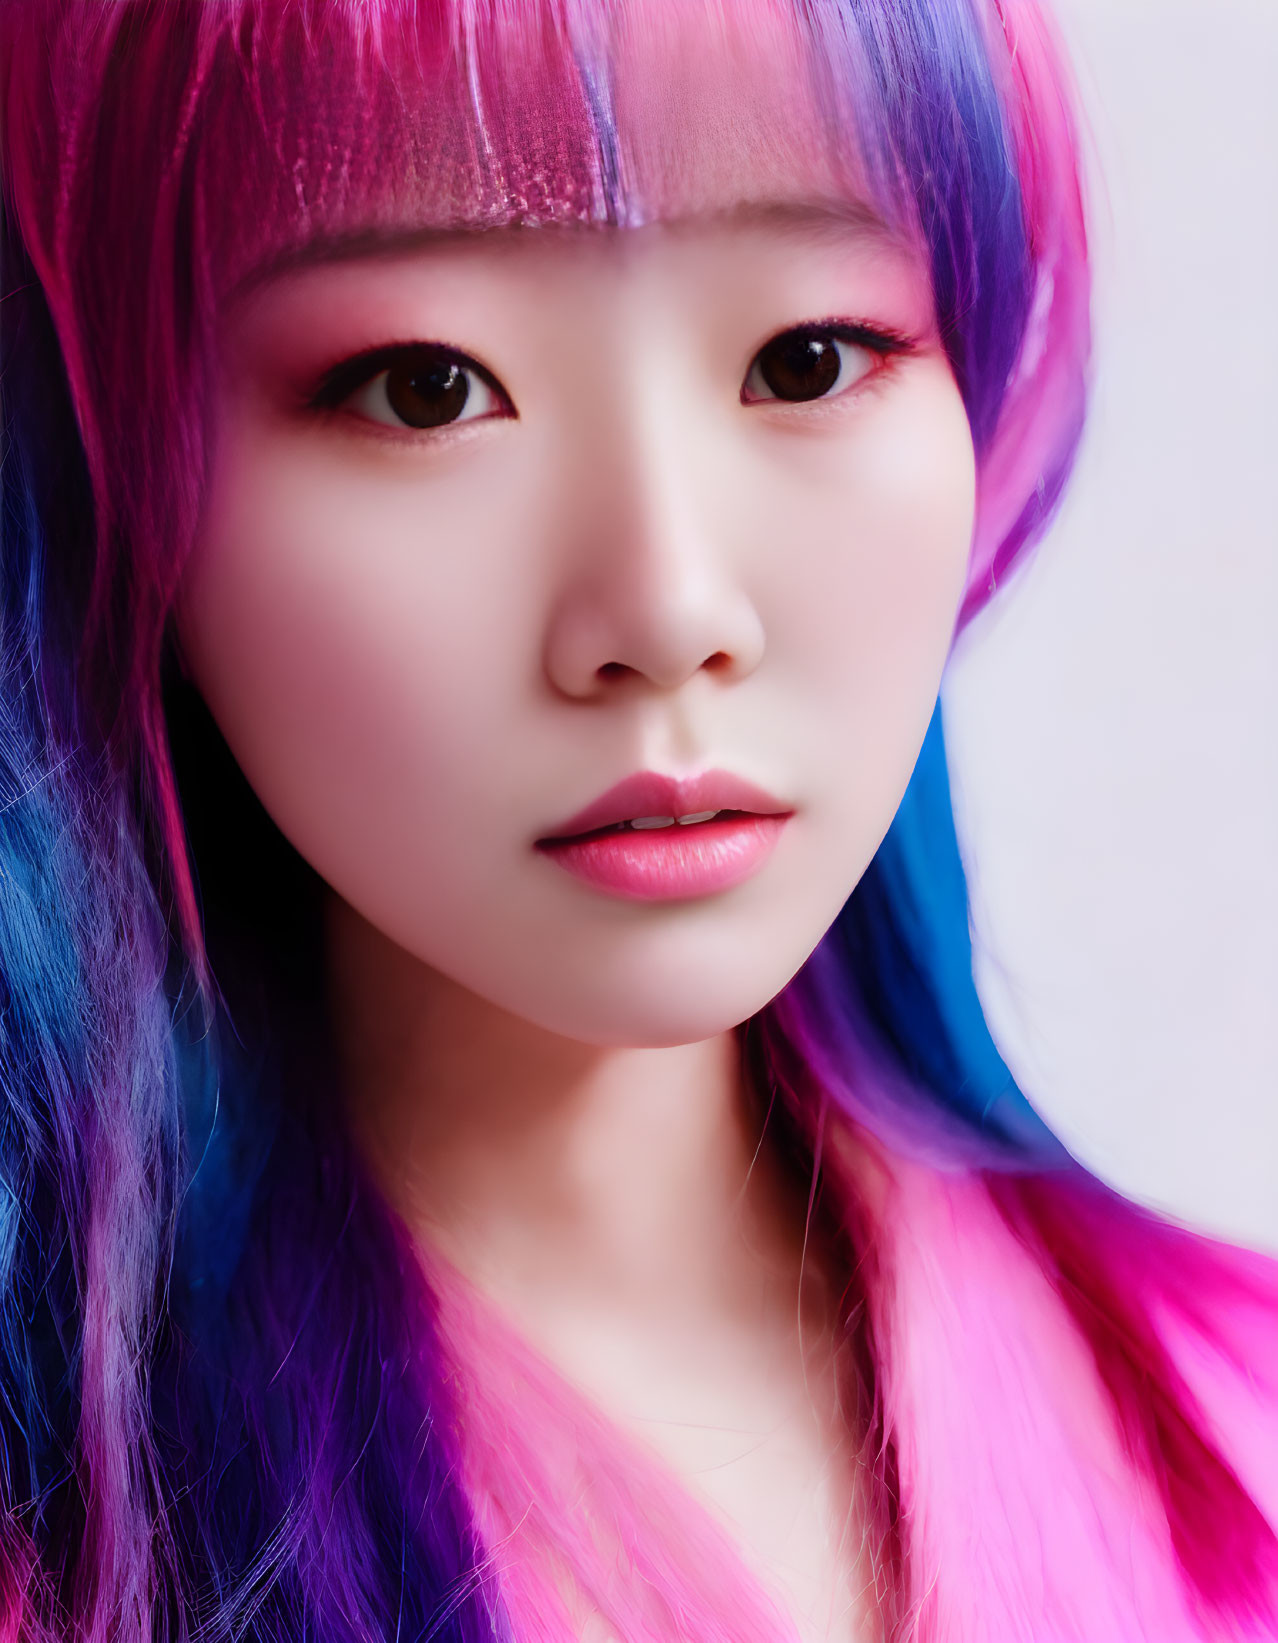 Vibrant multicolored hair portrait with pink, purple, and blue hues